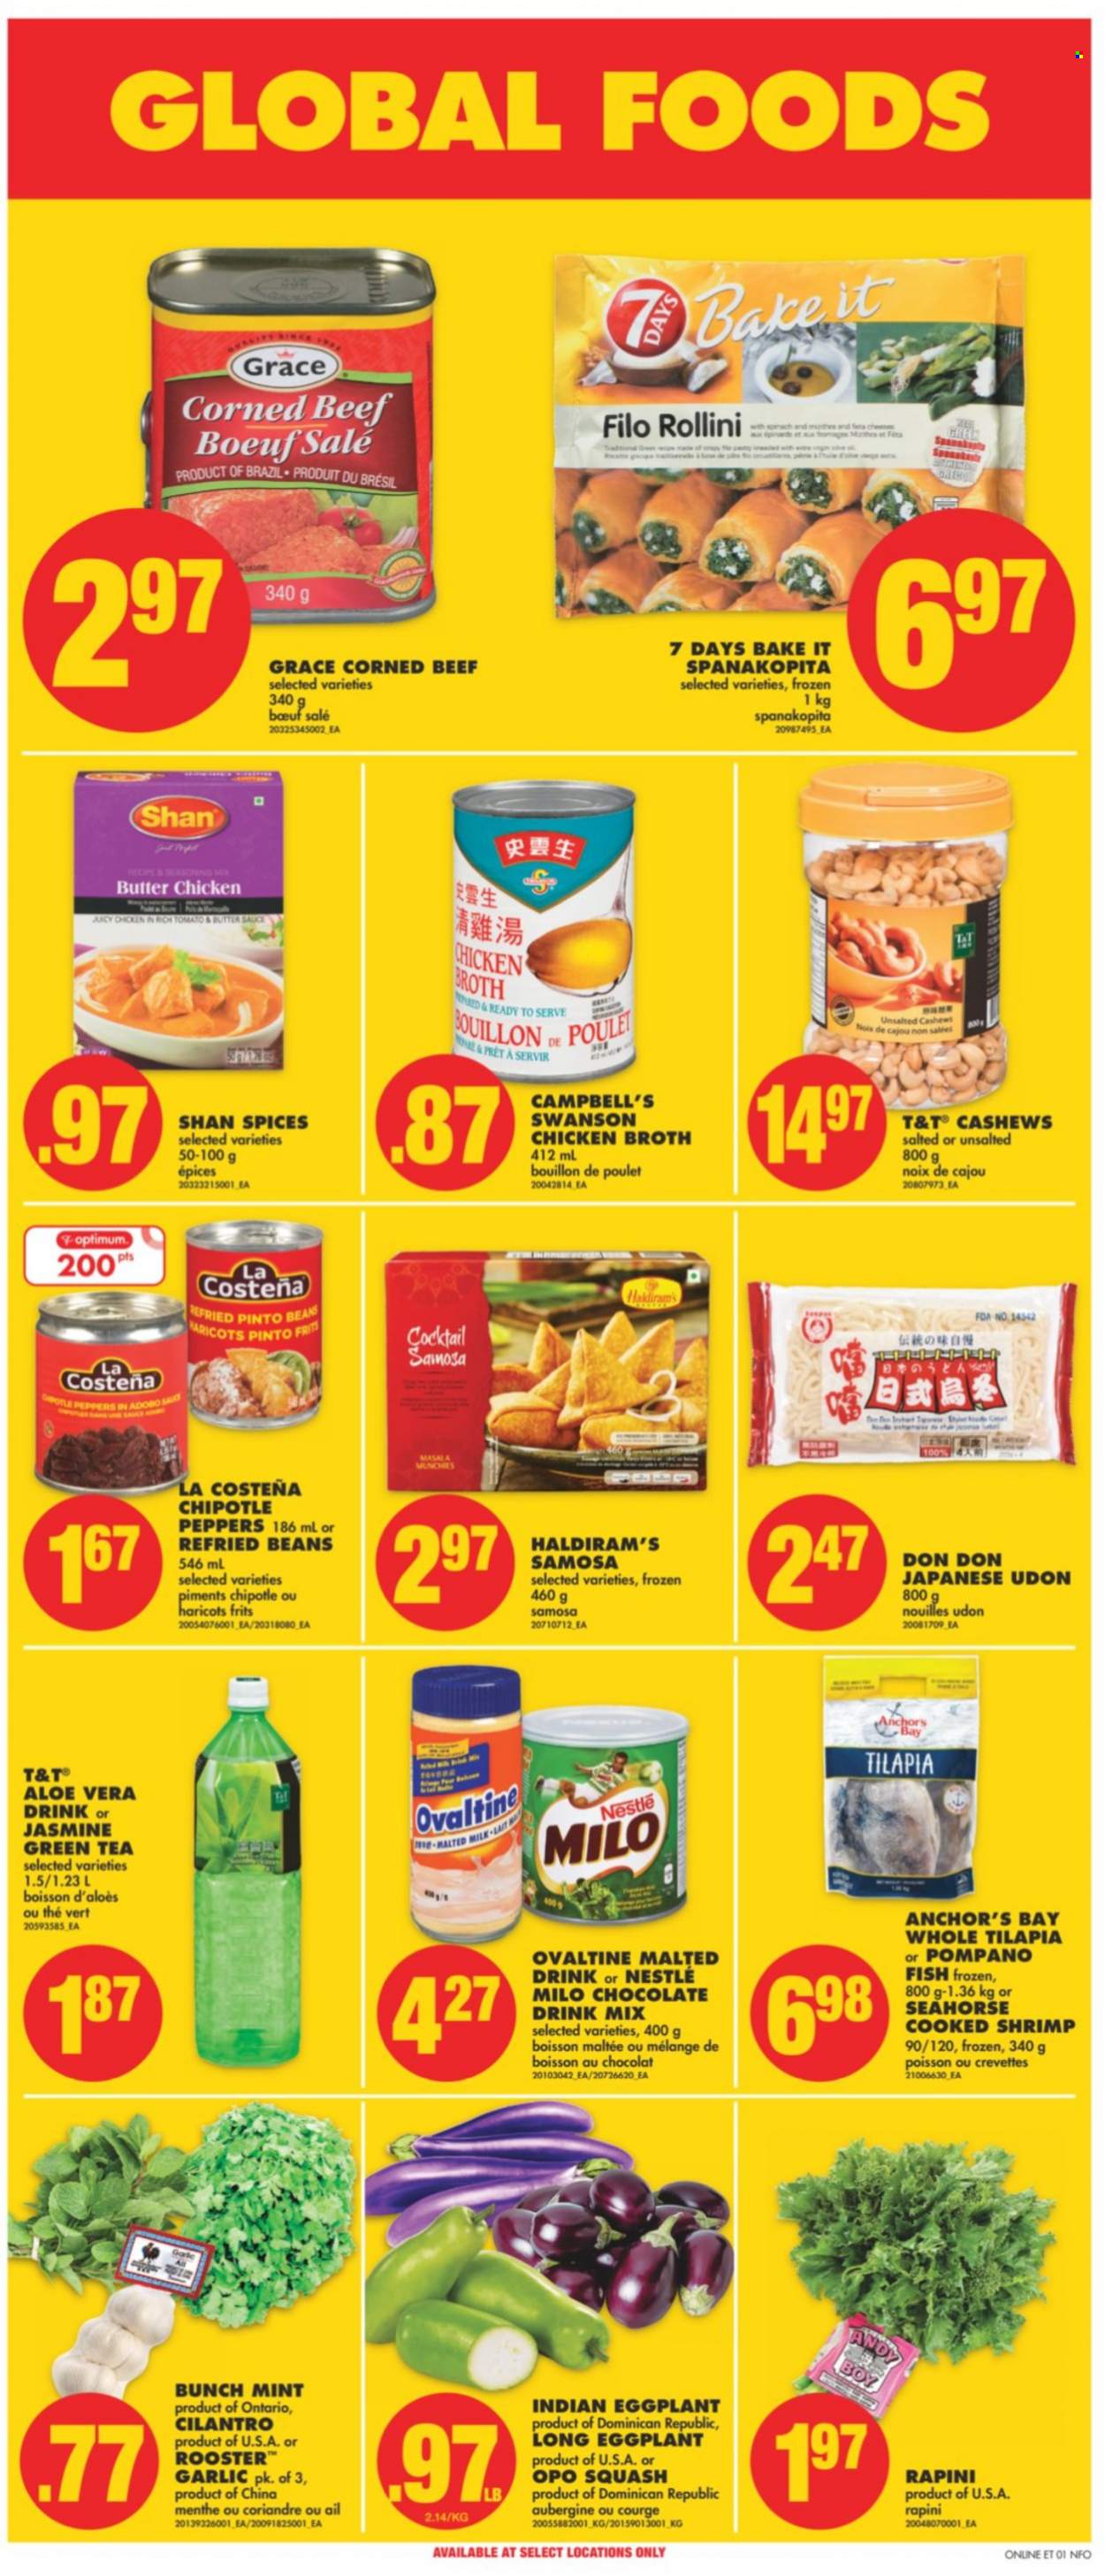 thumbnail - No Frills Flyer - October 21, 2021 - October 27, 2021 - Sales products - beans, garlic, spinach, peppers, eggplant, tilapia, pompano, fish, shrimps, Campbell's, sauce, corned beef, feta, milk, Milo, Anchor, filo dough, chocolate, 7 Days, bouillon, chicken broth, broth, refried beans, cilantro, adobo sauce, cashews, chocolate drink, green tea, tea, beef meat, Nestlé. Page 10.